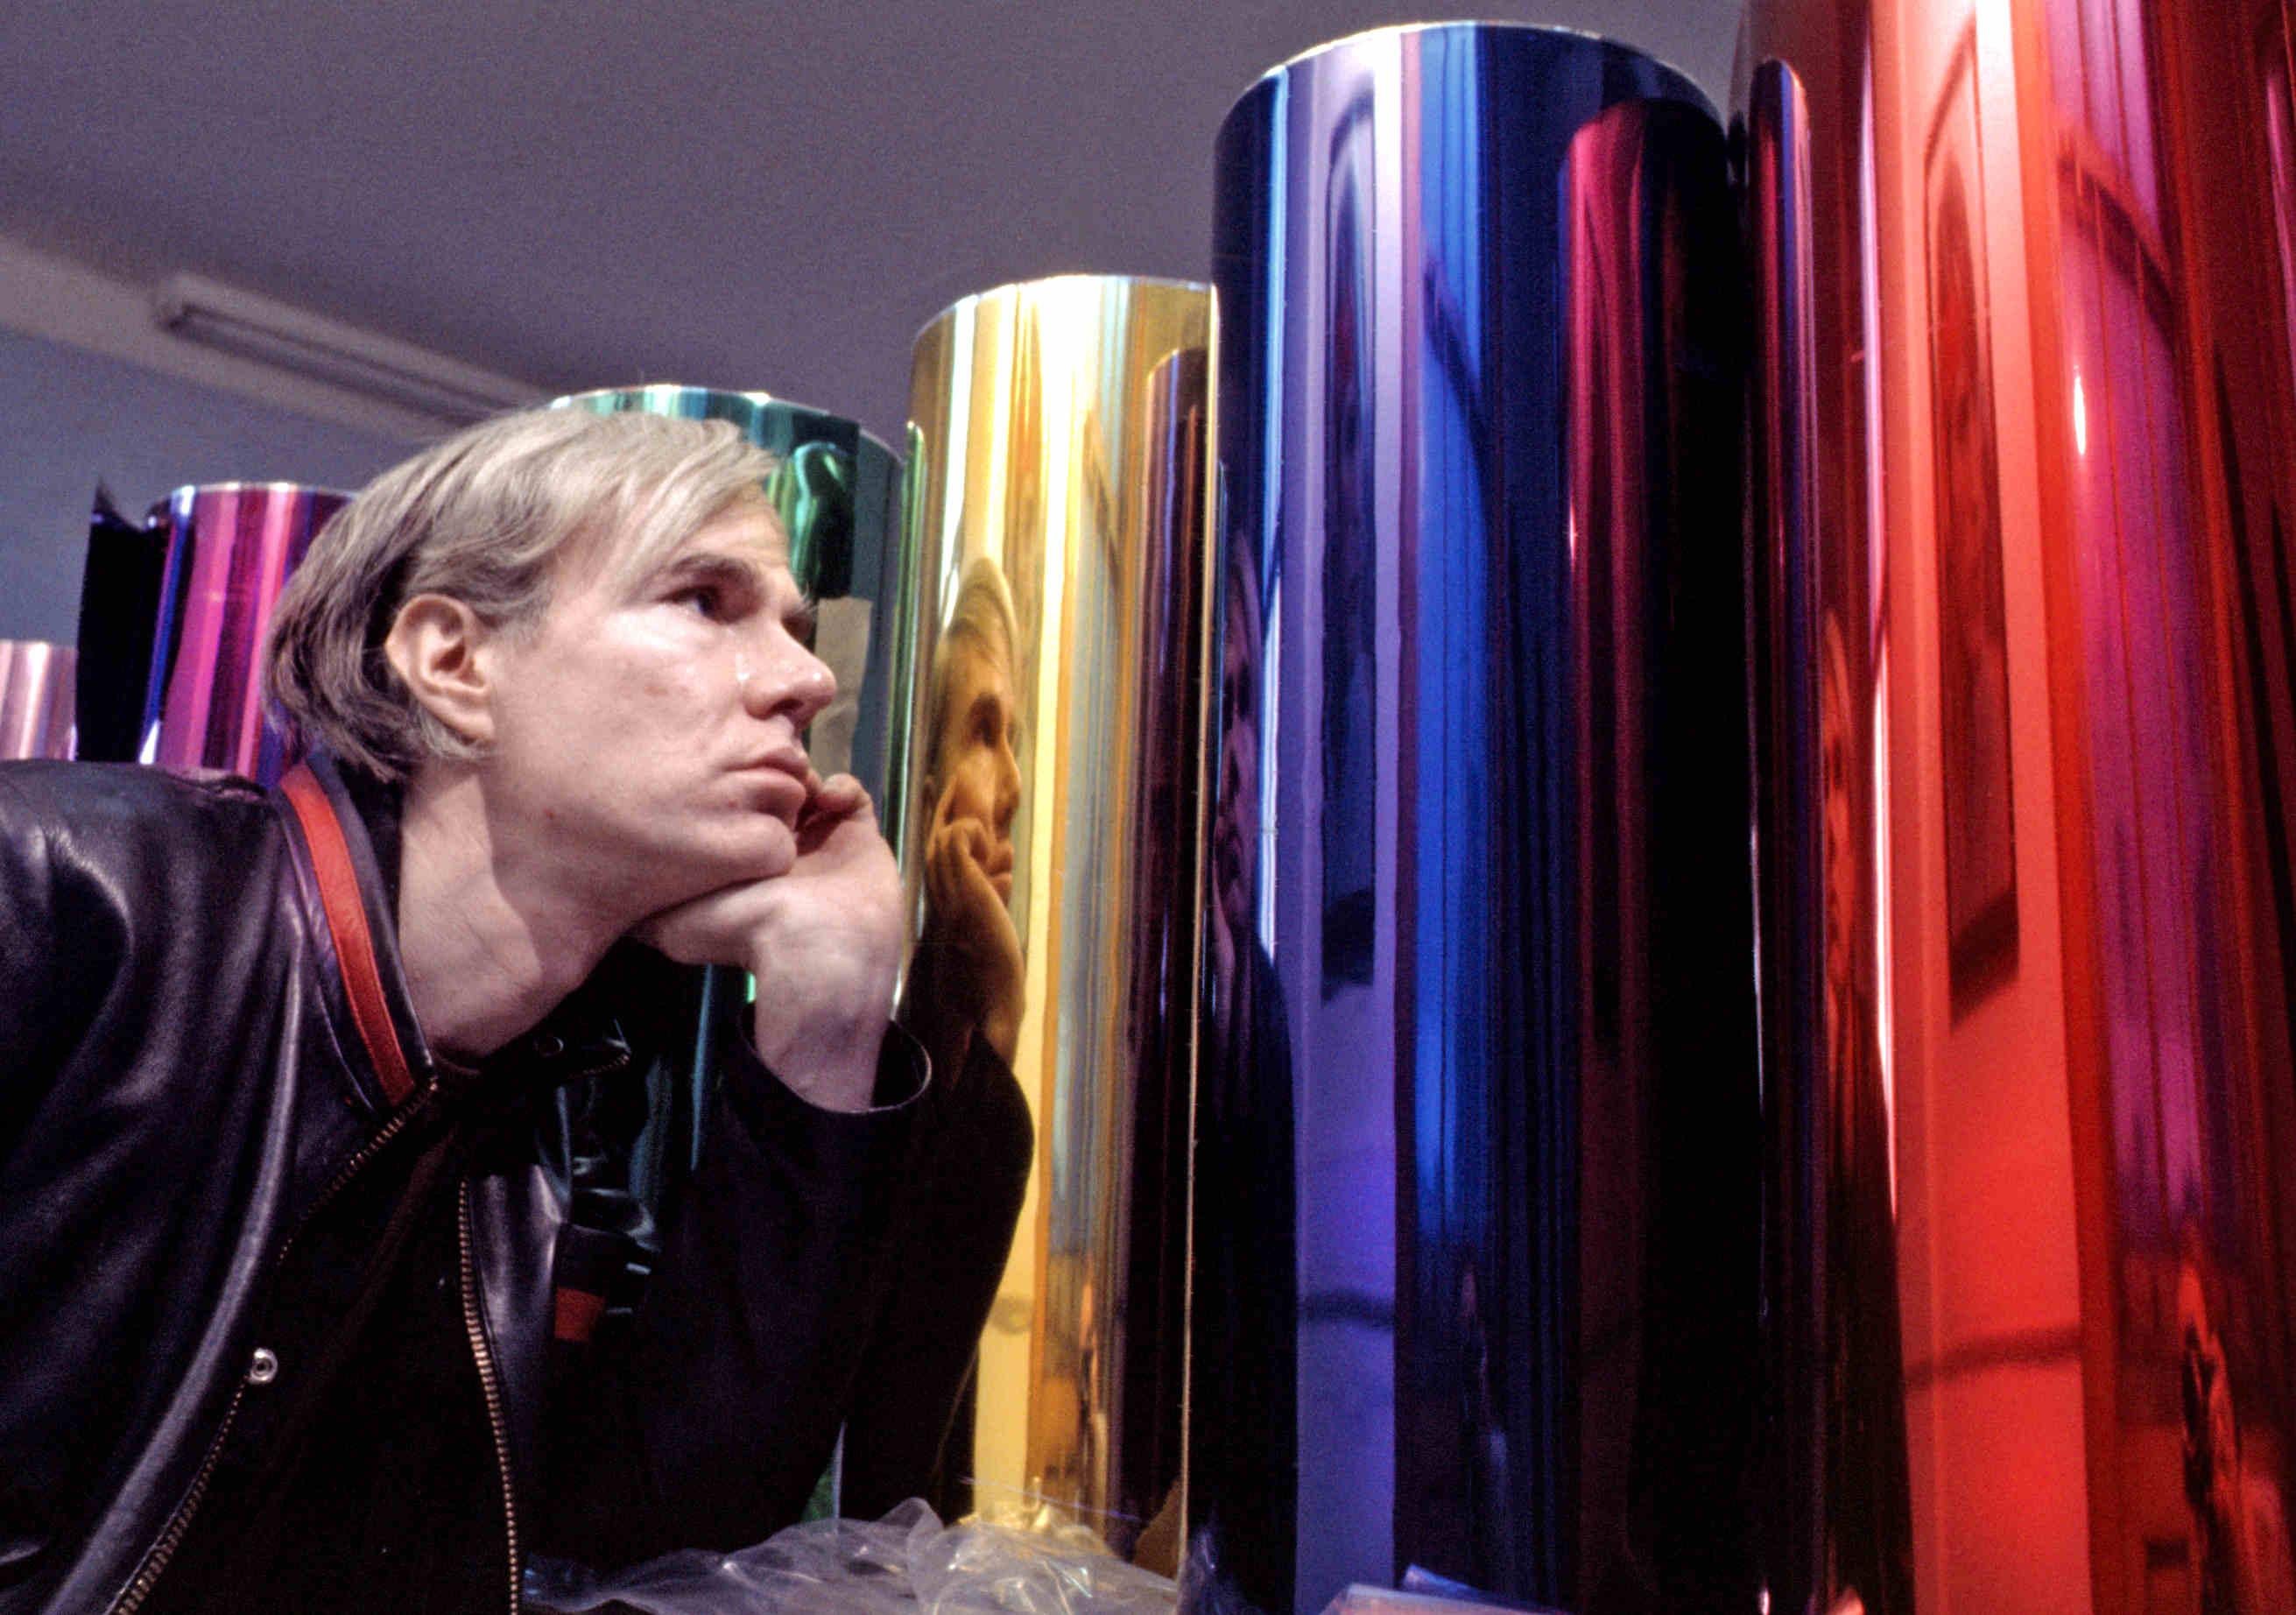 Jack Mitchell Portrait Photograph - Andy Warhol photographed in his Union Square Factory